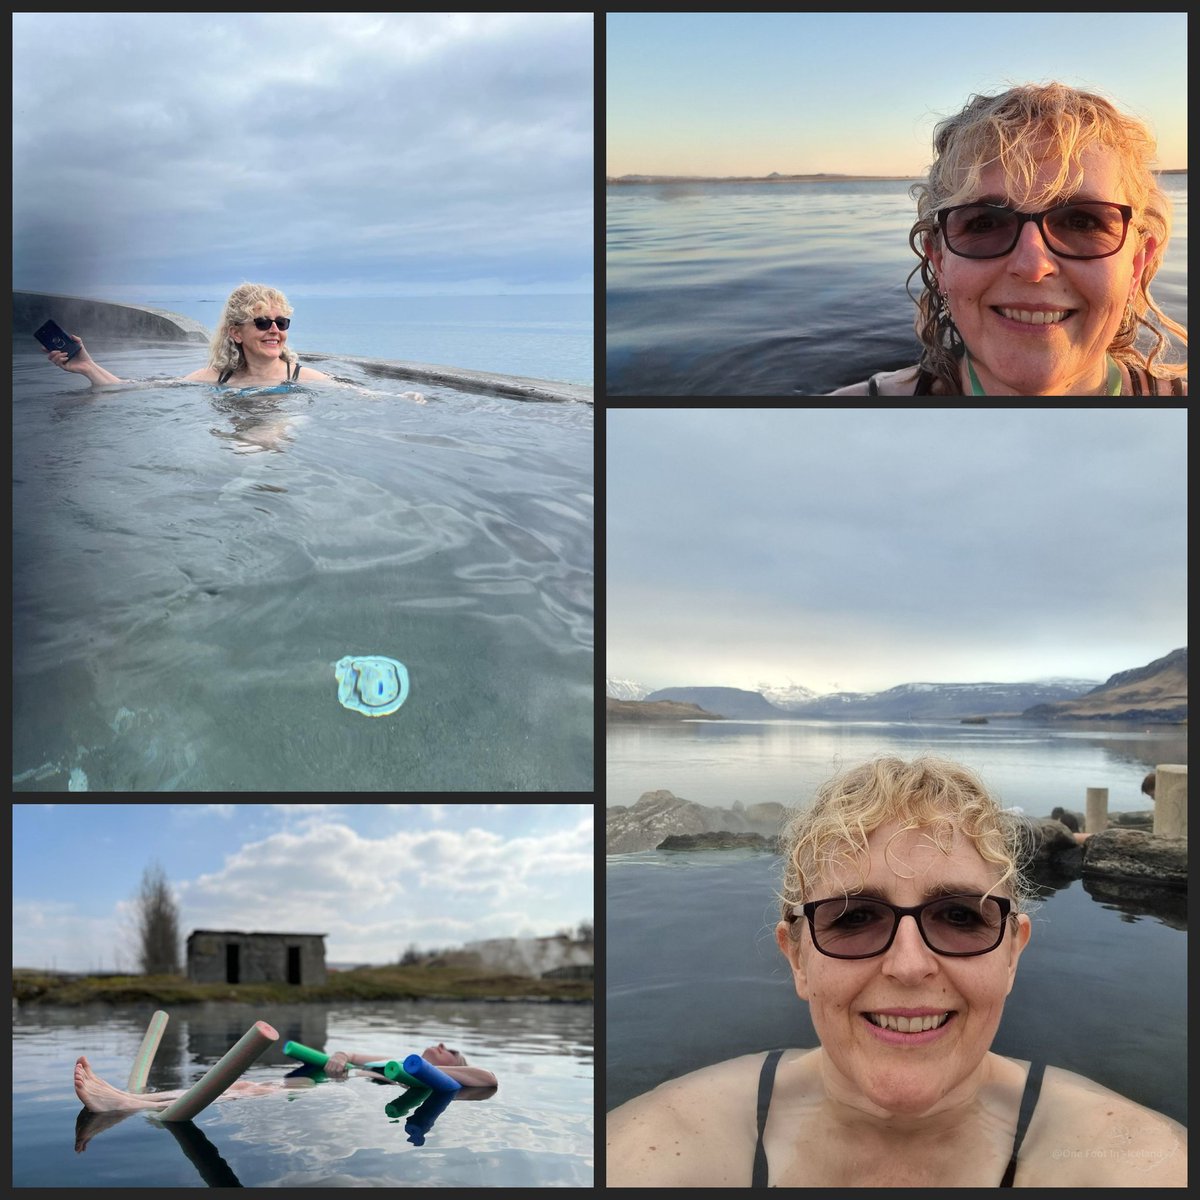 Here are 4 geothermal pools we visited last week (apologies for all the mugshots! 😂) - it was pretty blissful 🥵 (cold pool edition to follow! 🥶) Guðlaug, Sky Lagoon, Gamla Laugin, and Hvammsvík Hot Springs, which we timed carefully (but badly as it turned out!) for the tide 😂